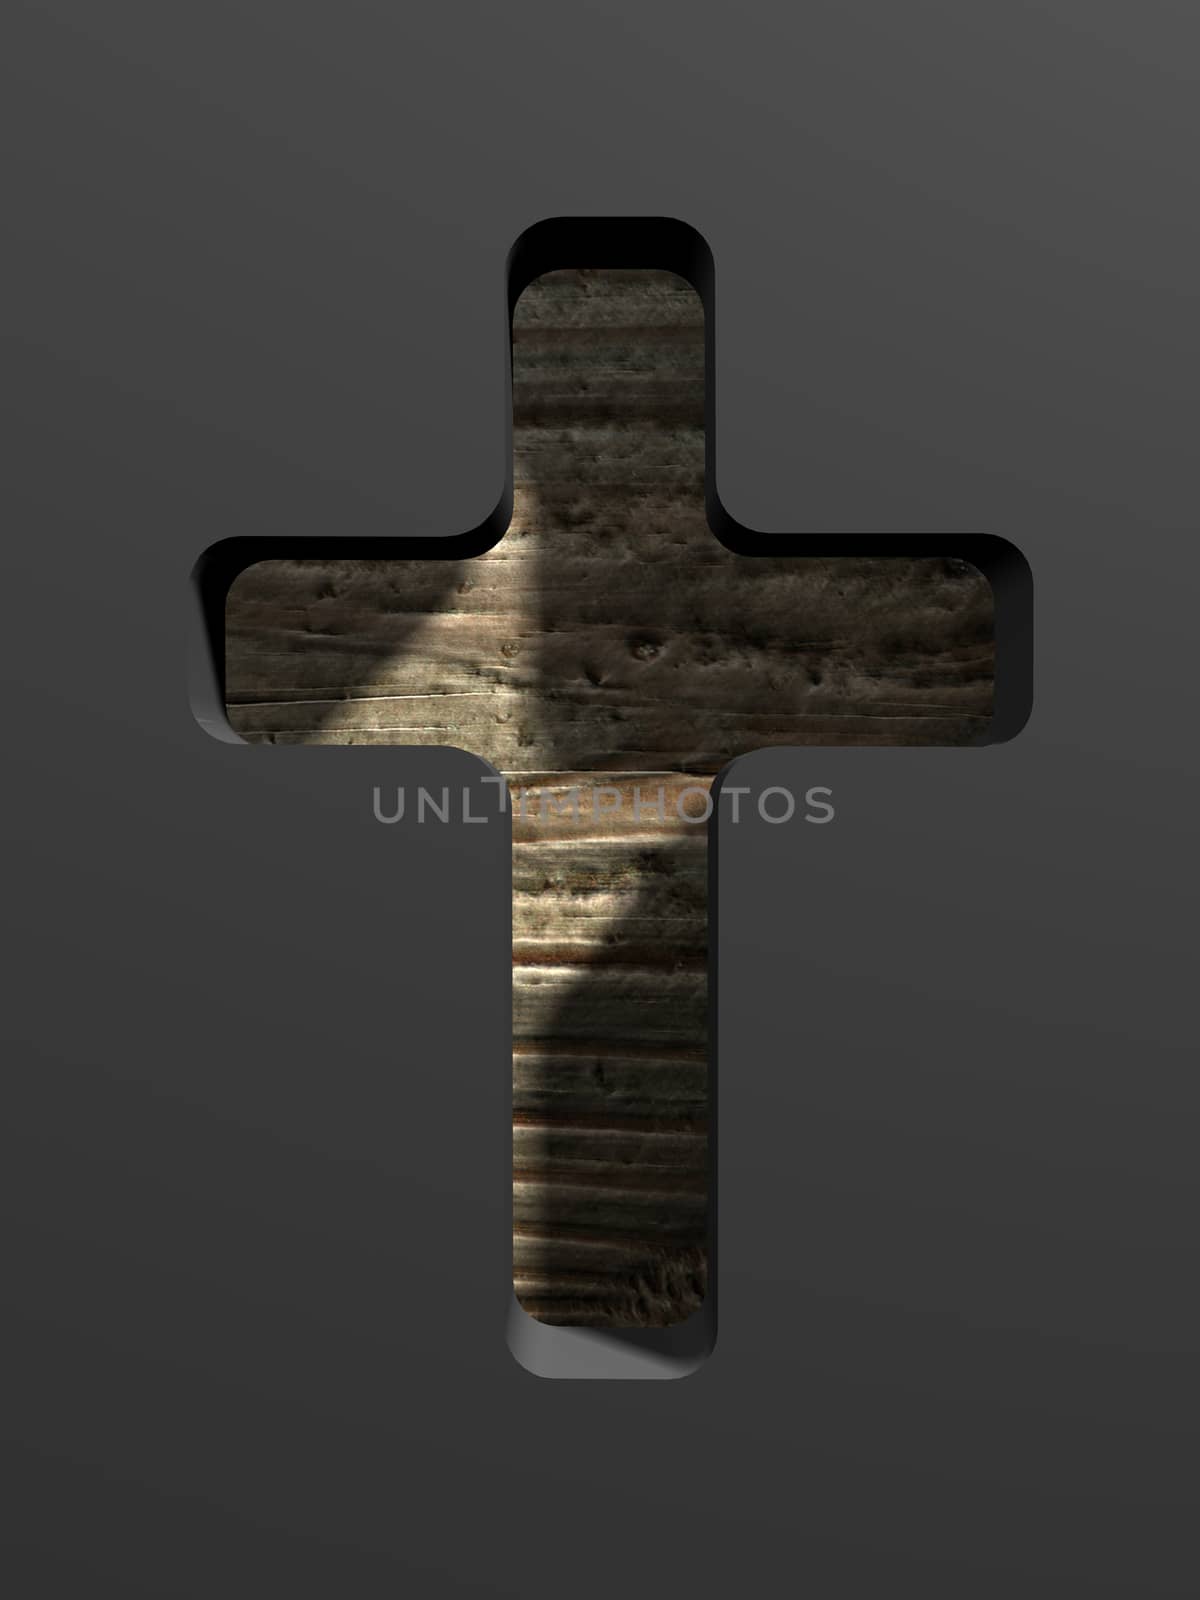 cross sign on wood made in 3d software